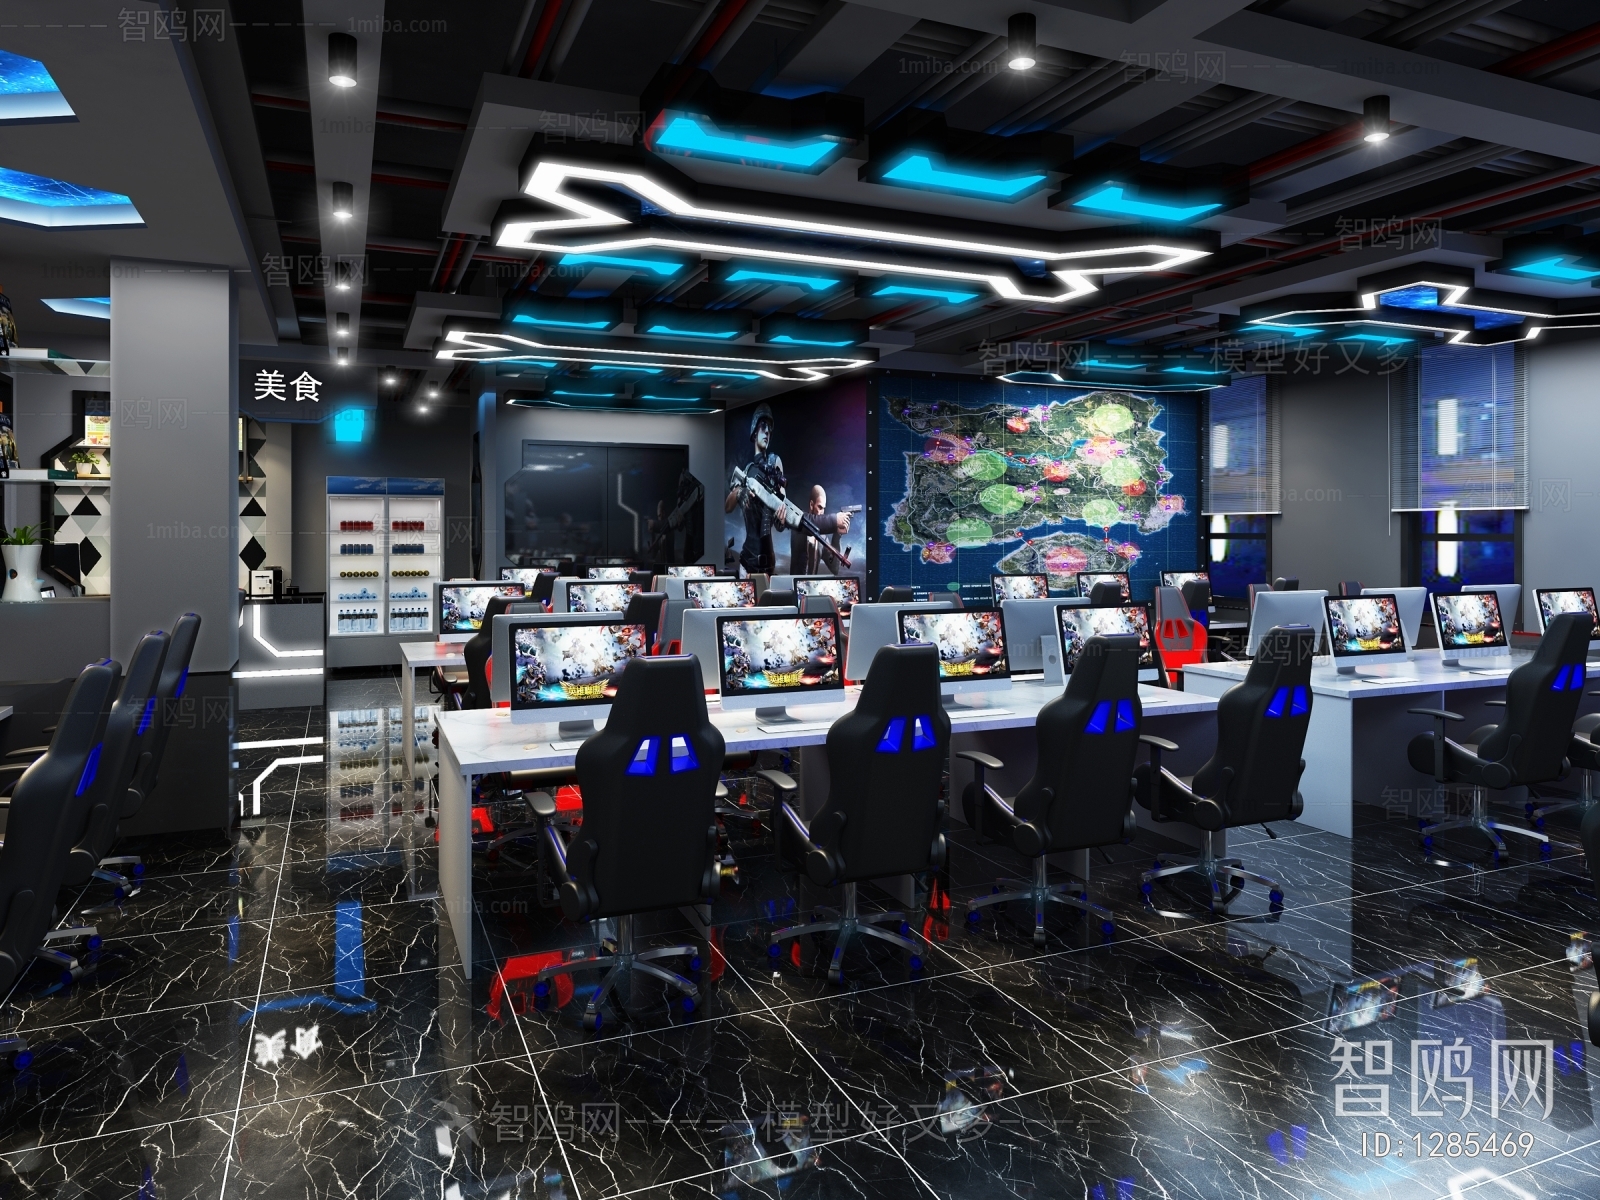 Industrial Style Internet Cafe